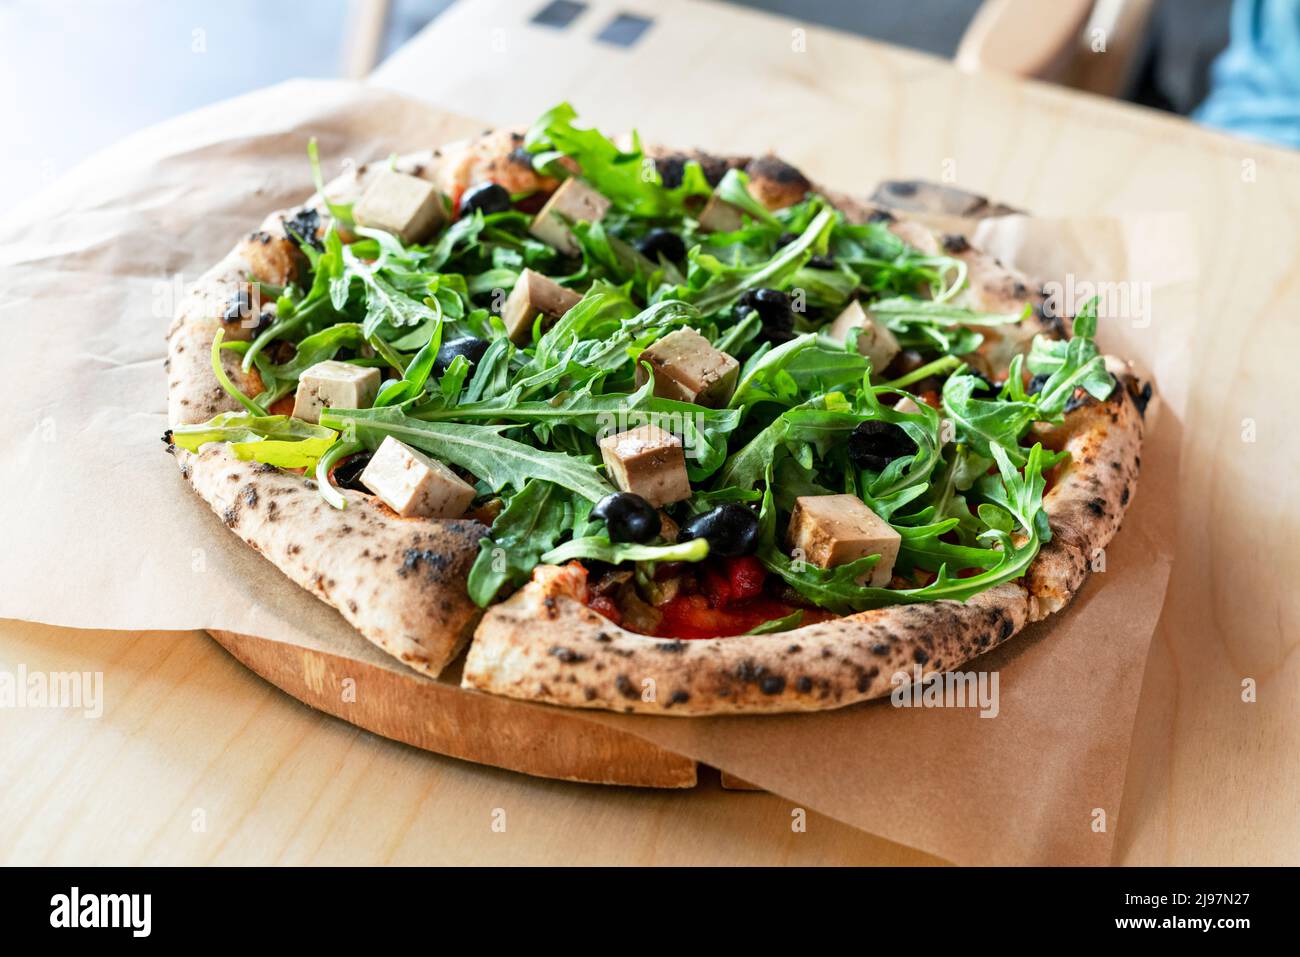 top view of vegan pizza with arugula or rucola tofu olives and tomatoes close-up wooden board vegetarian food healthy eating selective focus Stock Photo